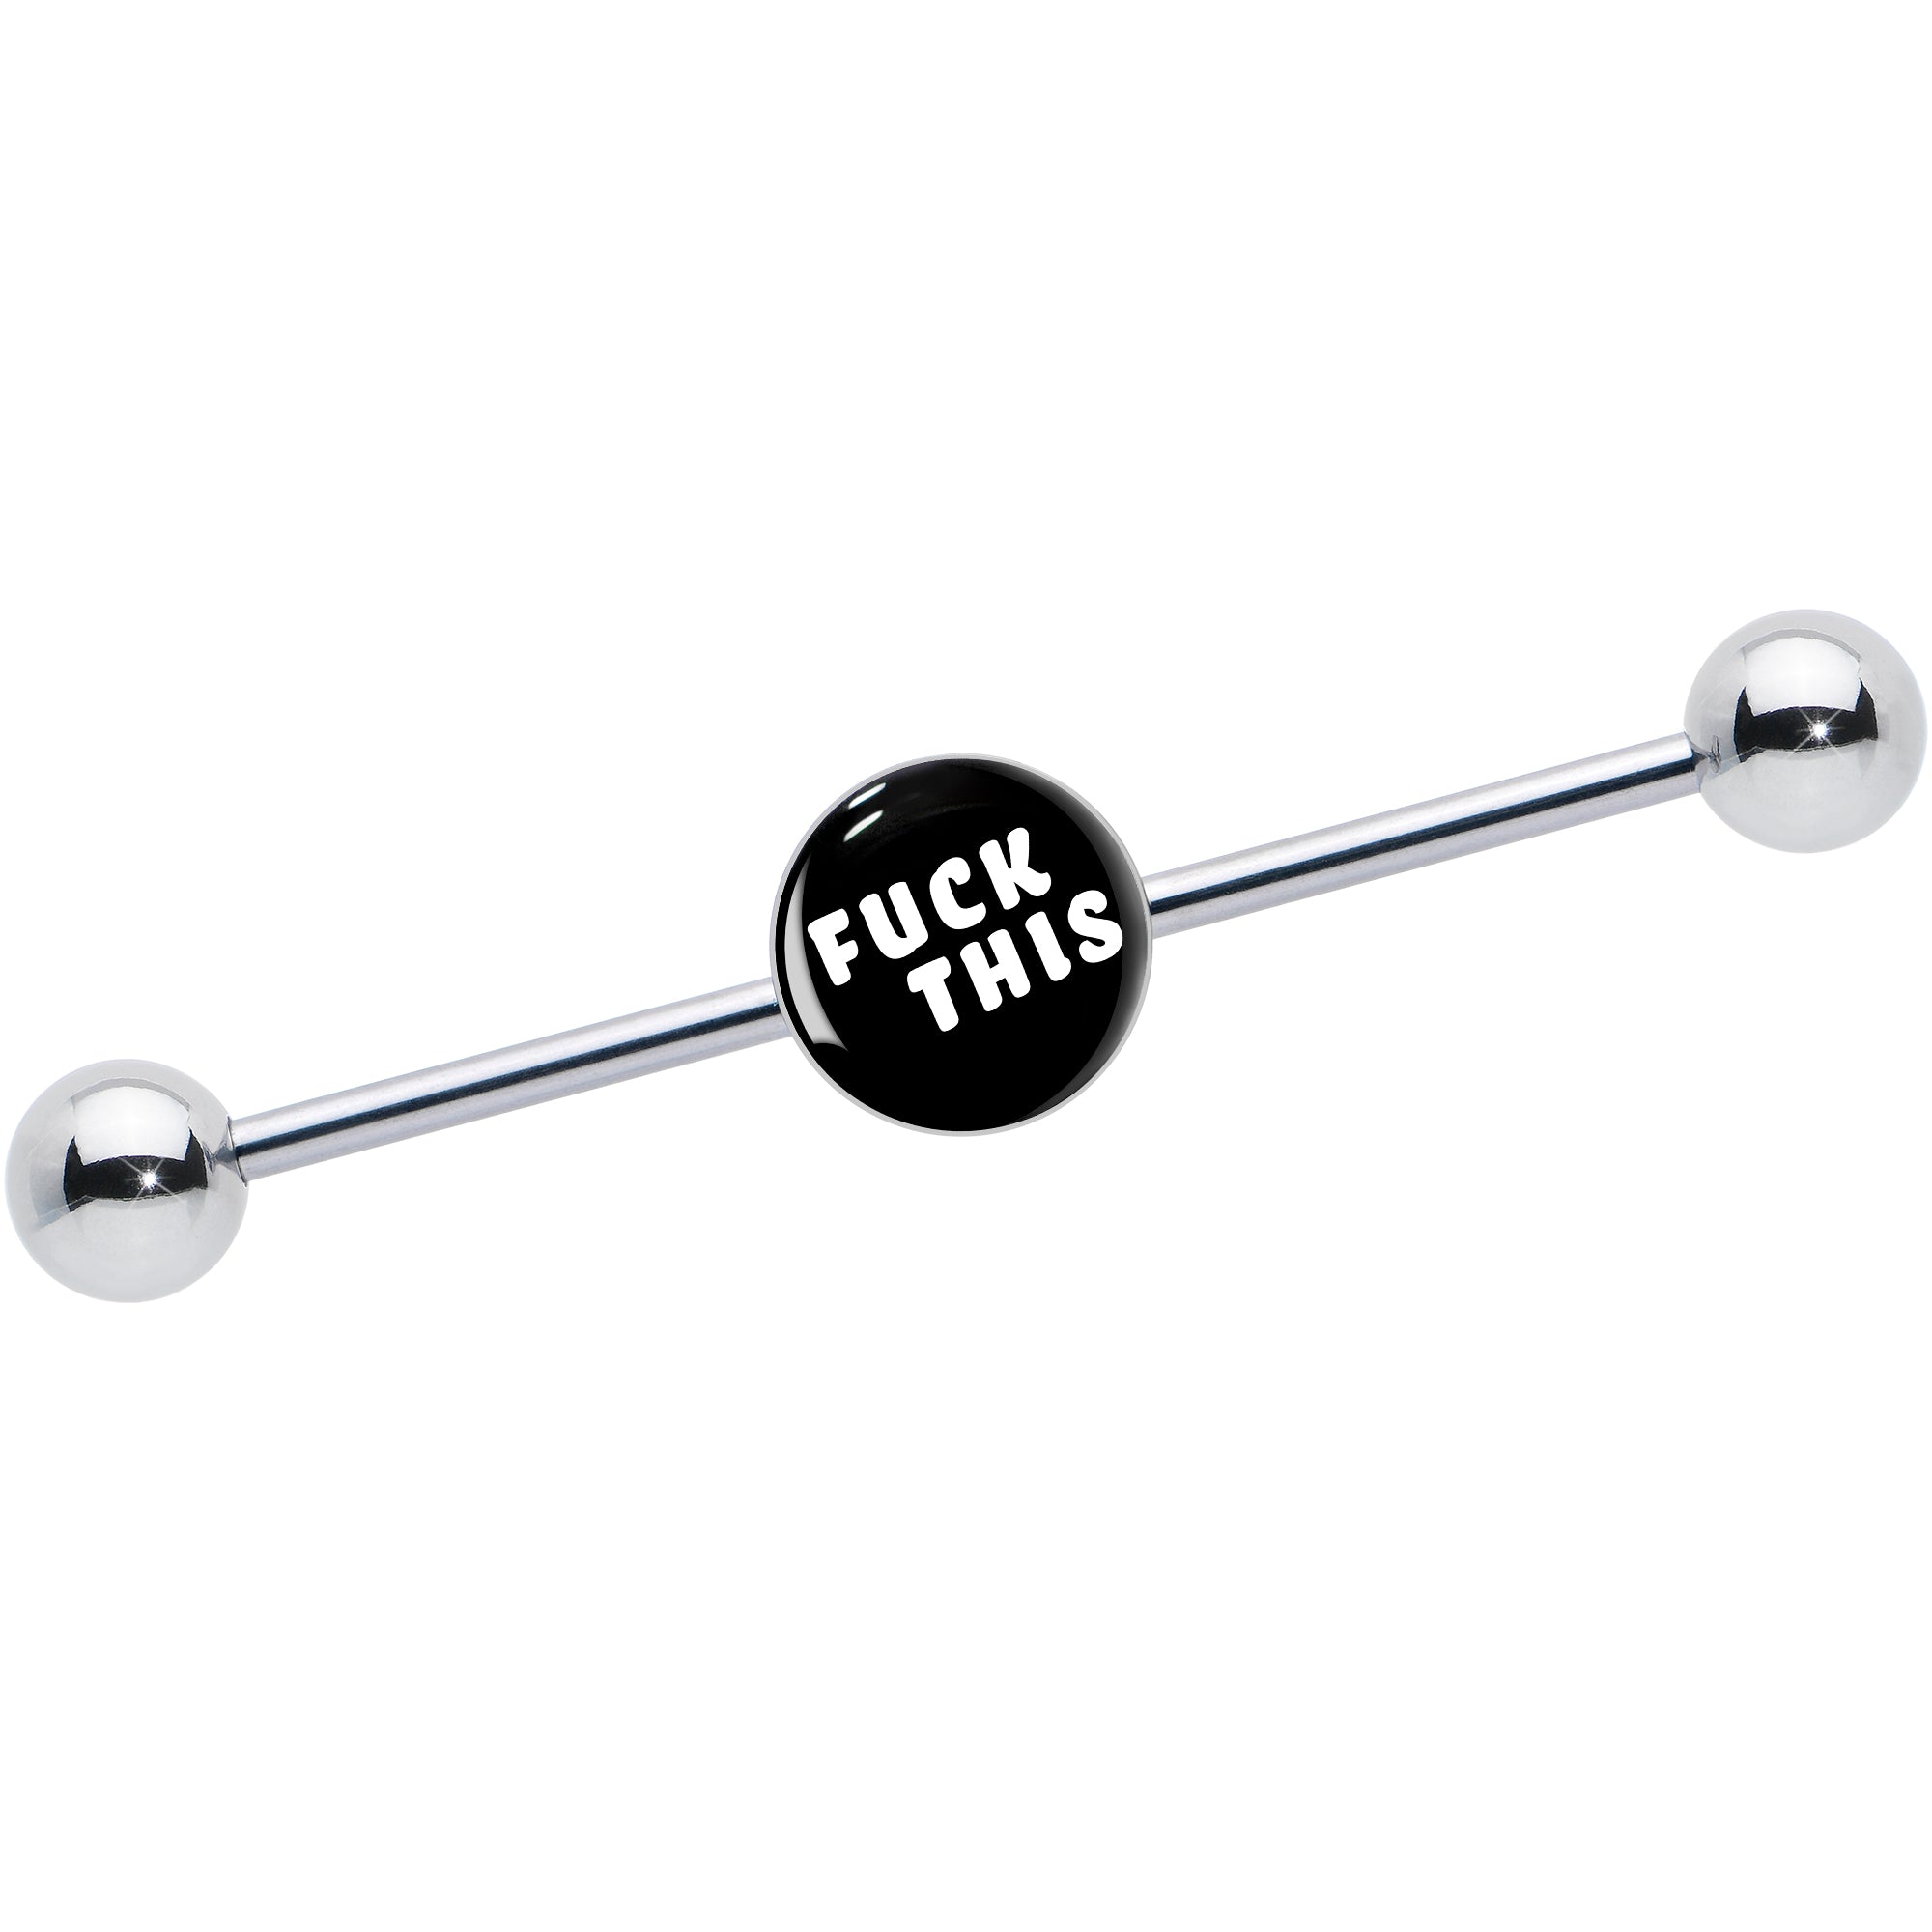 14 Gauge Black White F*ck This Industrial Barbell